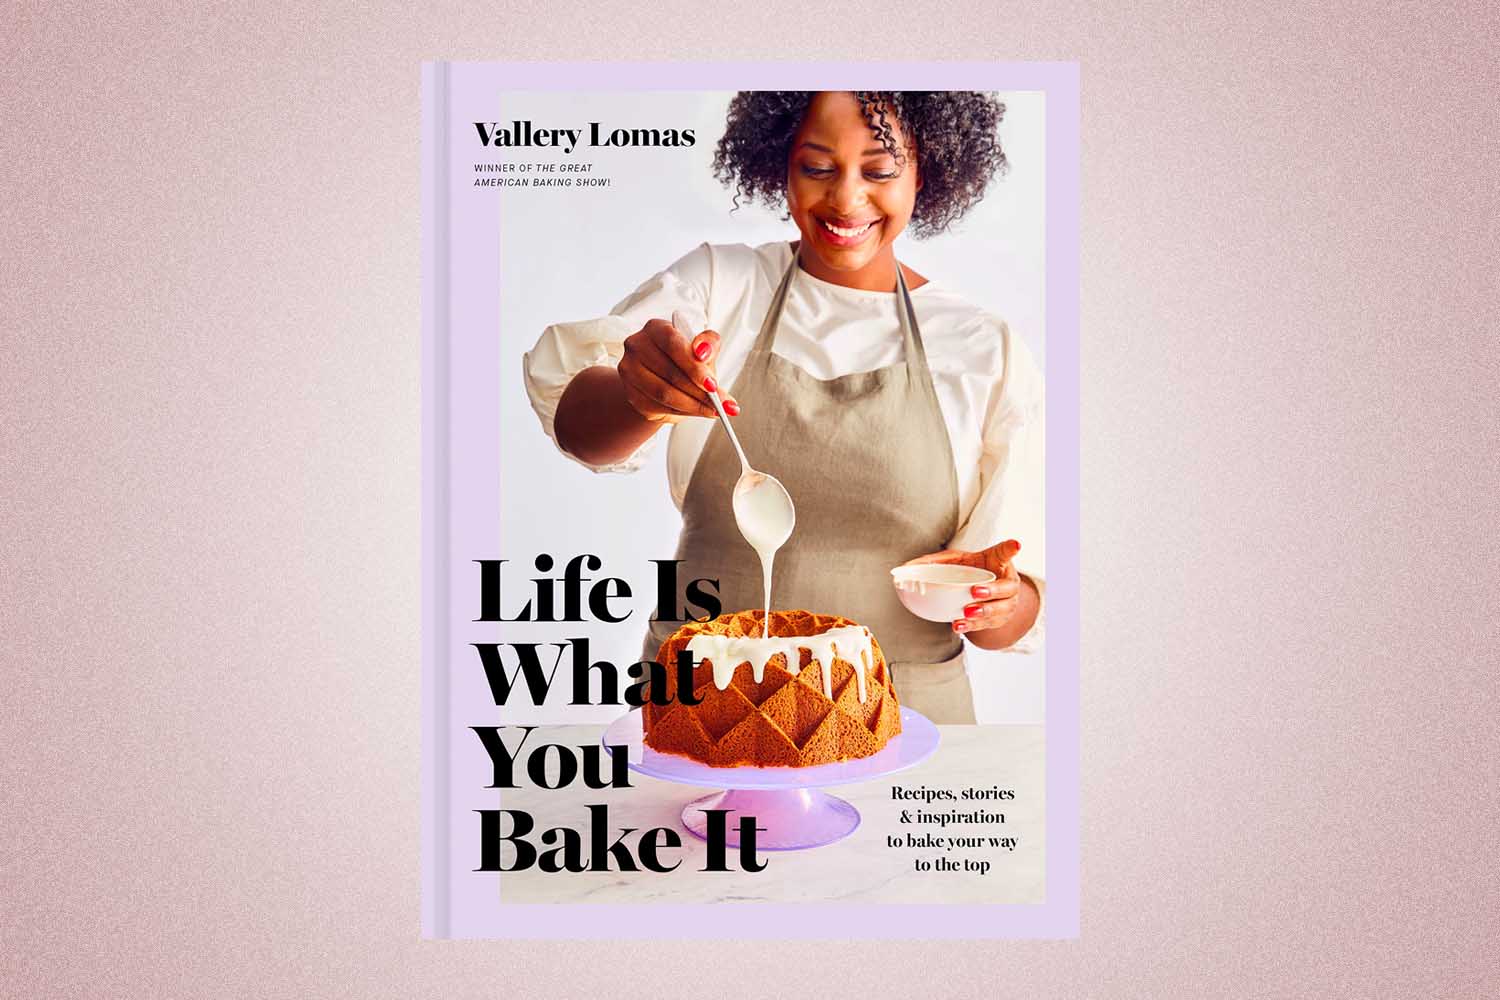 The cover of the book "Life Is What You Bake It: Recipes, Stories, and Inspiration to Bake Your Way to the Top: A Baking Book" with a woman glazing a cake, a perfect Valentine’s Day gift for 2022, on a pink background.